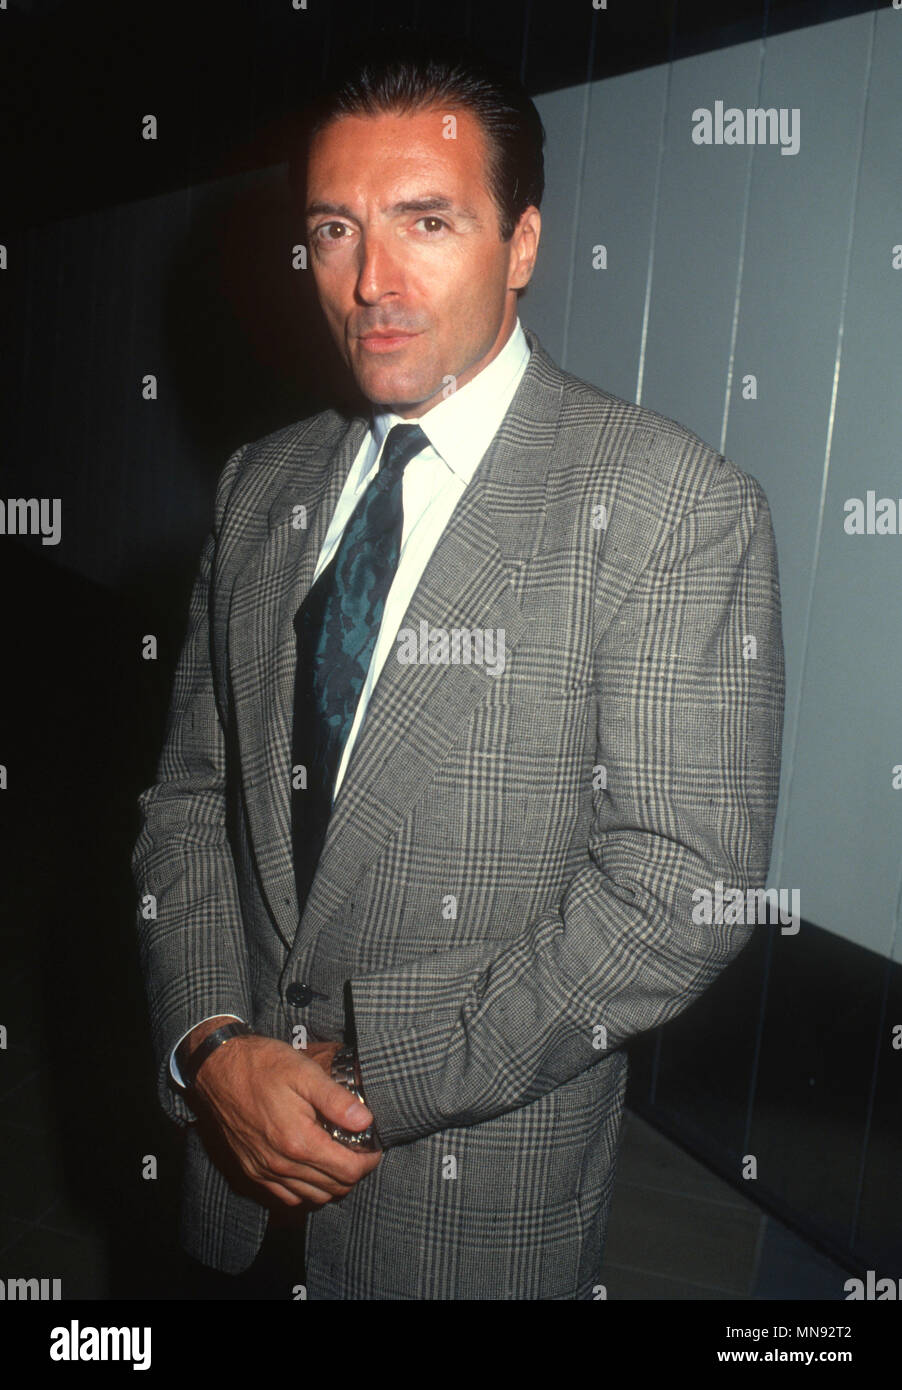 LOS ANGELES, CA - AUGUST 20: Actor Armand Assante attends screening of 'Eternity' on August 20, 1990 in Los Angeles, California. Photo by Barry King/Alamy Stock Photo Stock Photo